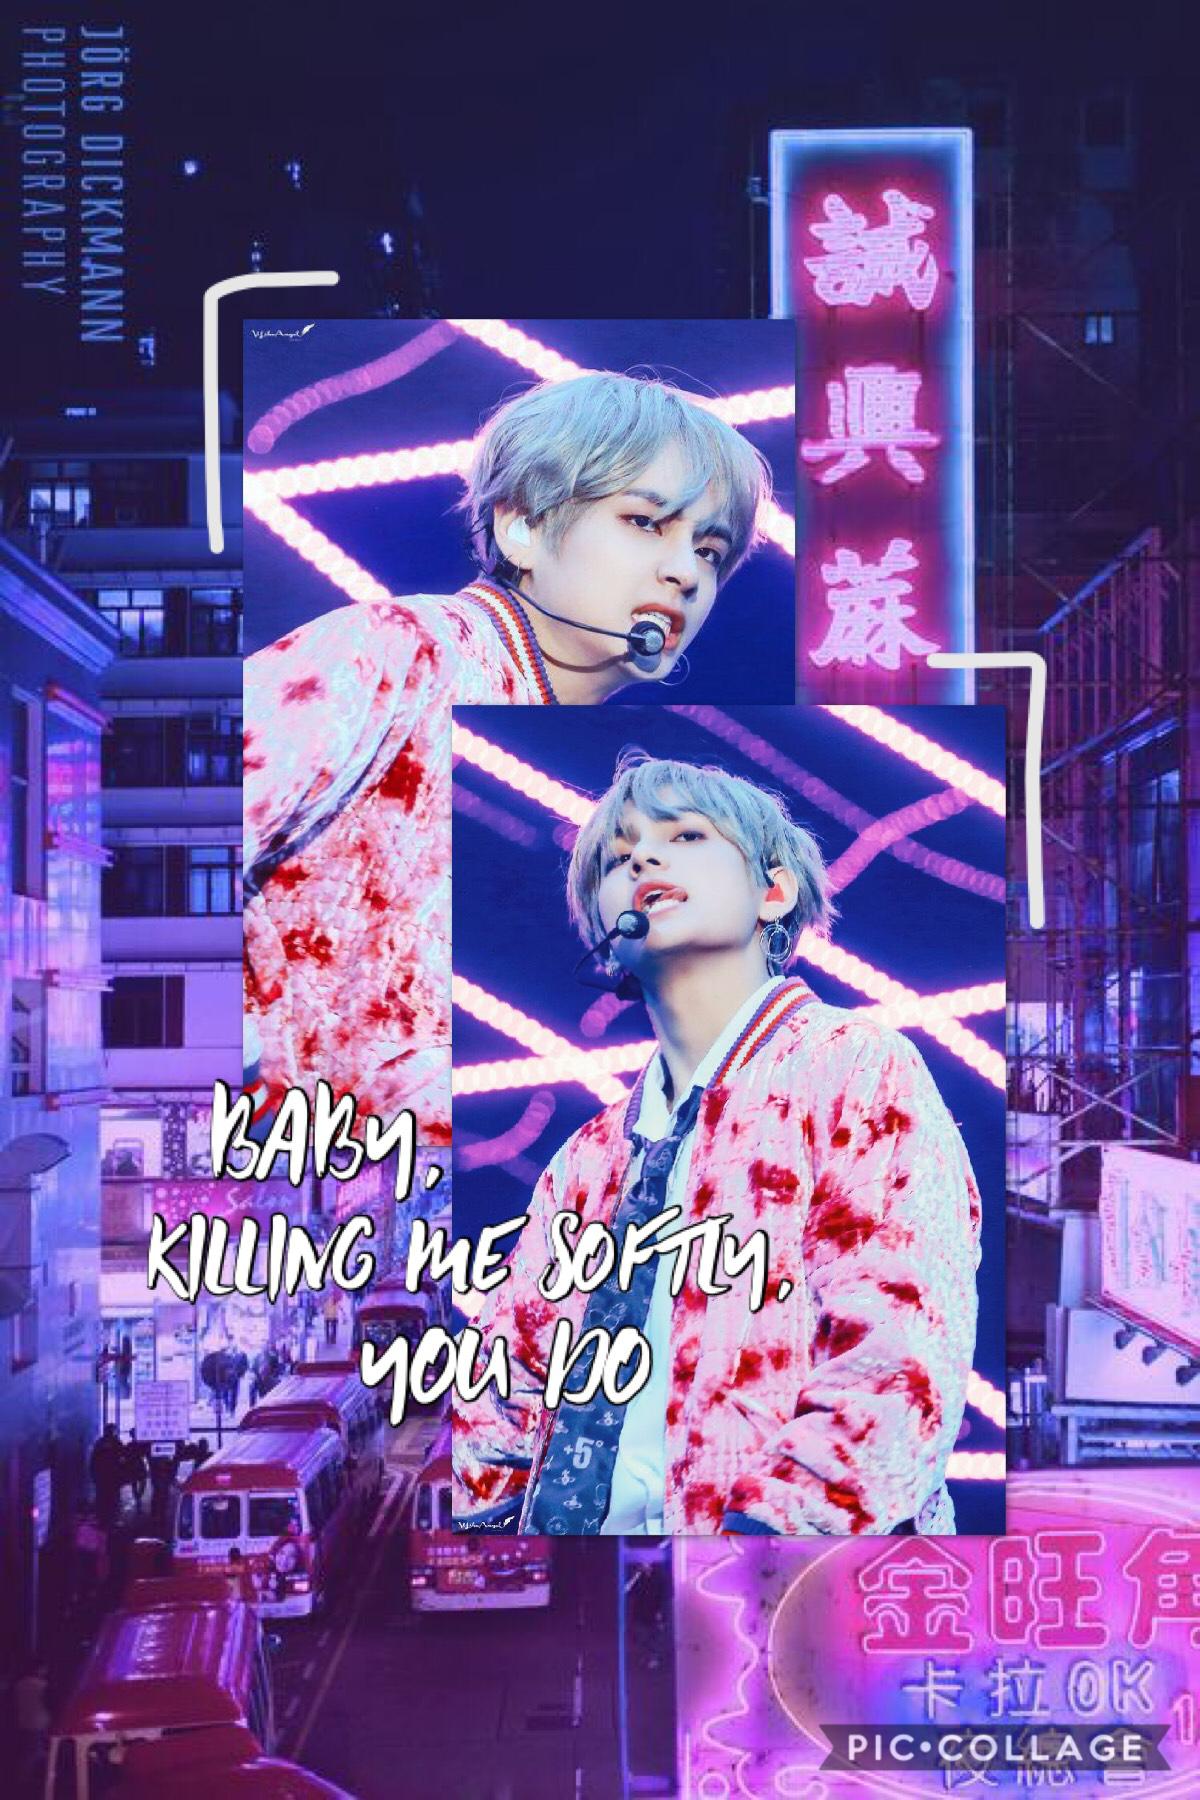 second edit for his birthday bc i didn’t really like the first one so here u goooo! 